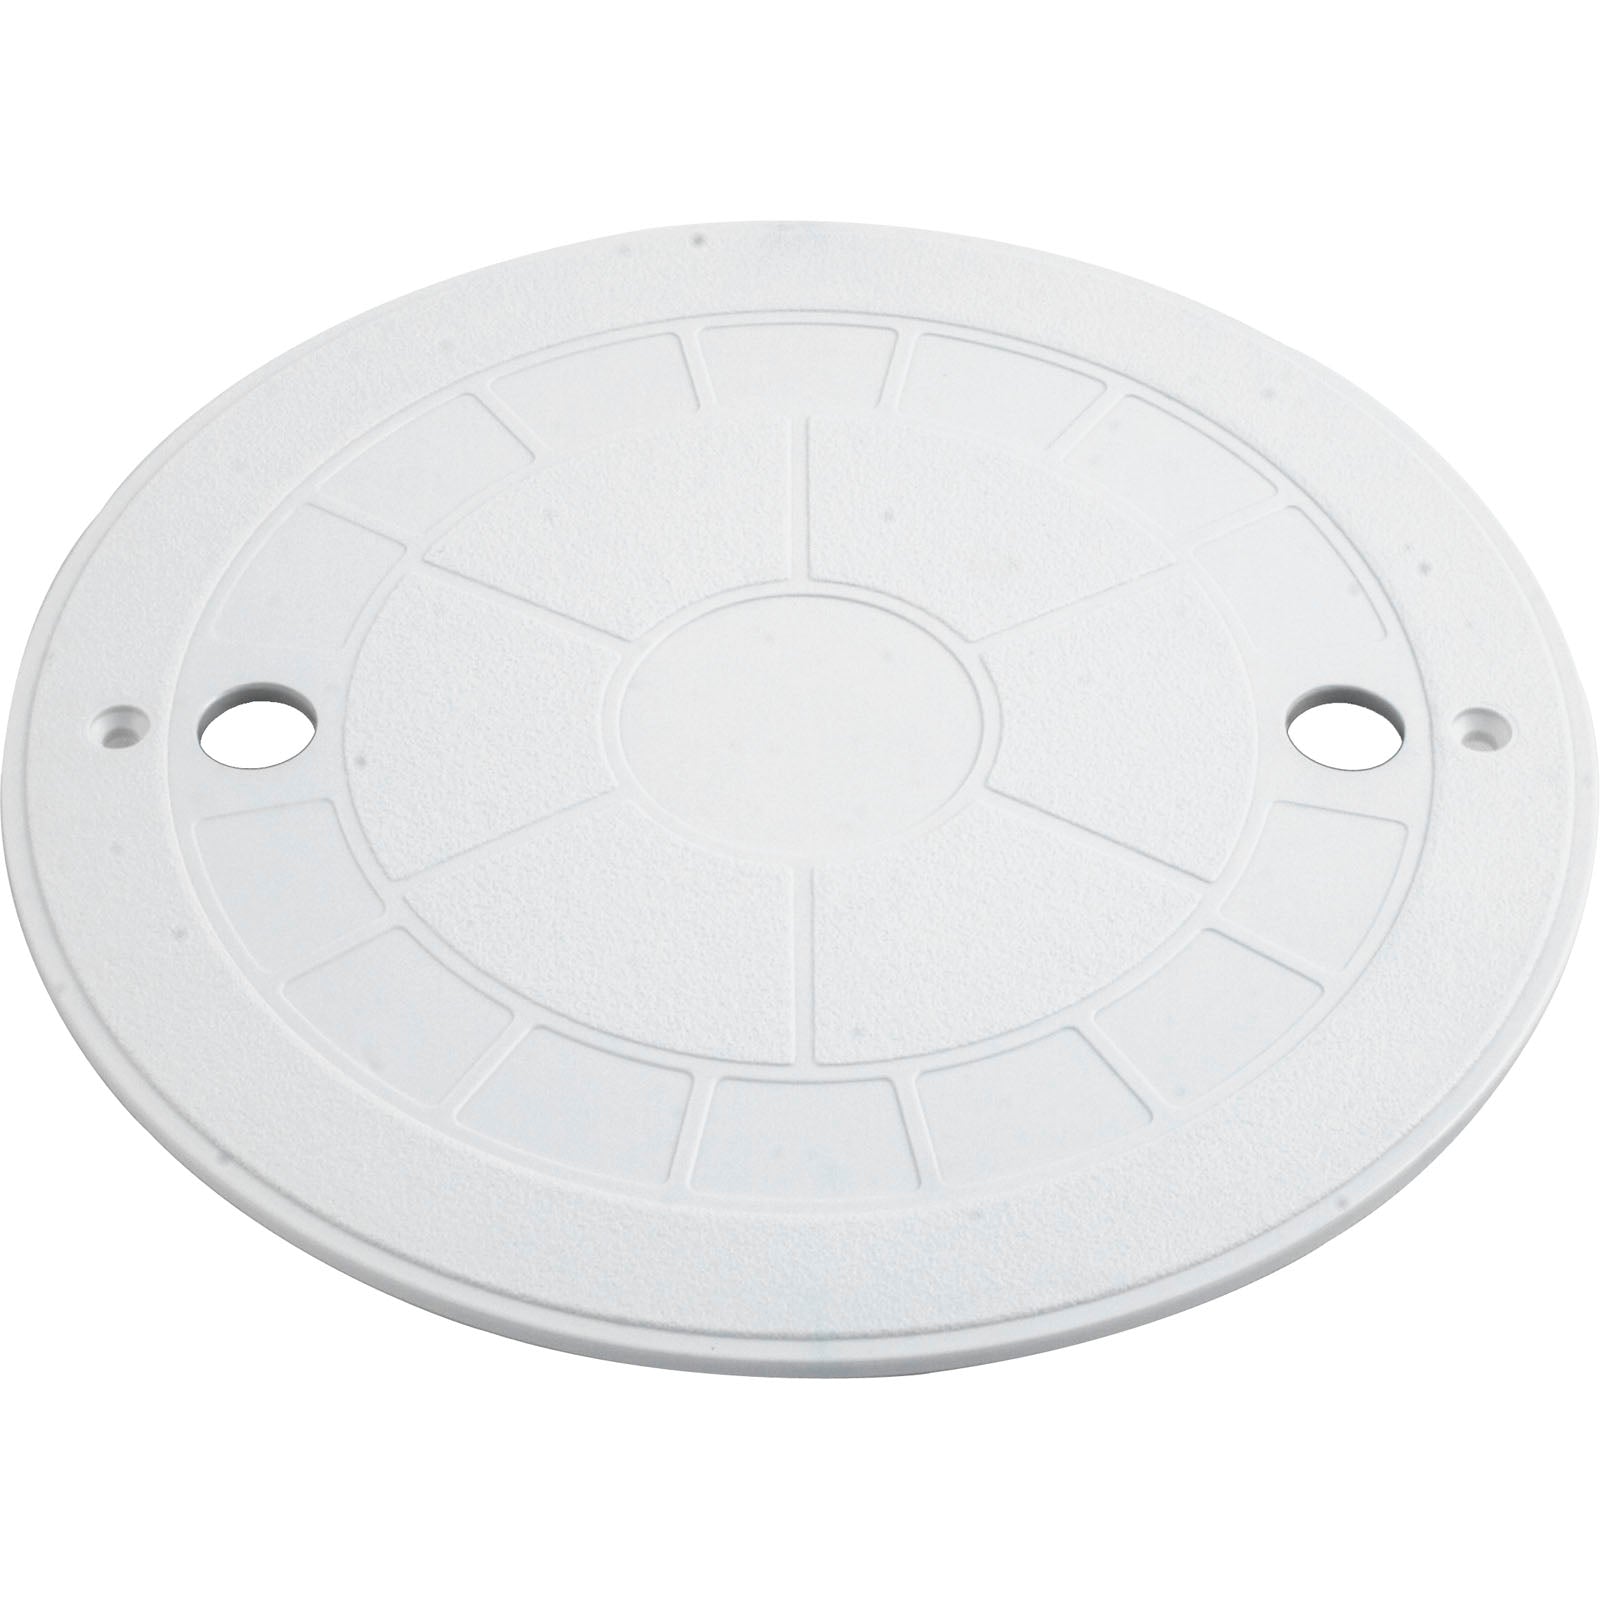 CMP Water Leveler Cover Without Collar [White] (25504-000-010)